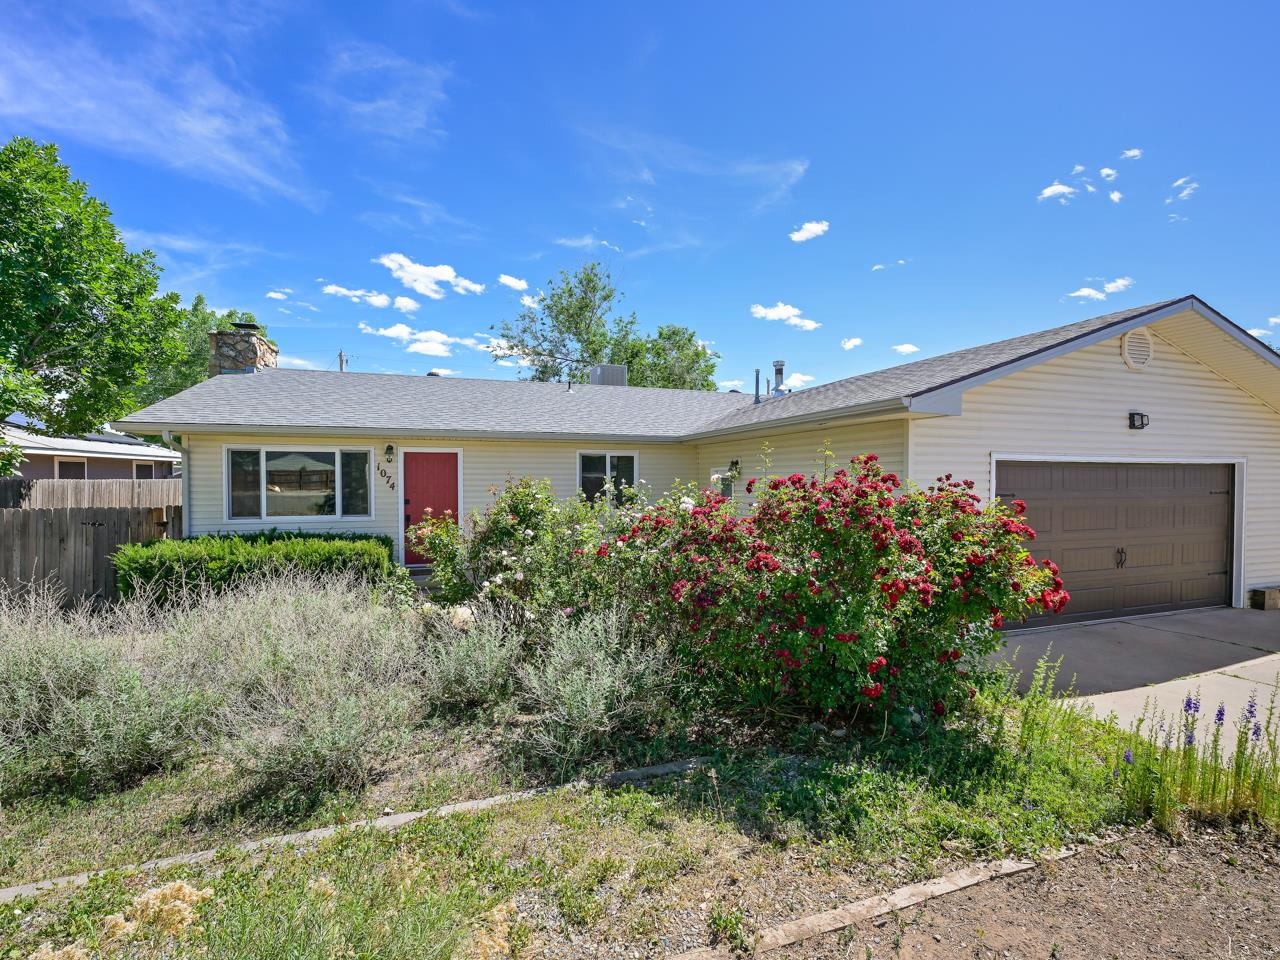 Come see this comfortable and charming property in the heart of Fruita, Colorado! Just a few blocks from downtown, this home is in a prime location with no shortage of nearby amenities. You'll find yourself close to schools, shops, restaurants, and parks, ensuring you're never far from what you need. As you approach the home, you'll be greeted by beautifully maintained garden beds out front, filled with flowers and shrubs ready to bloom. Step inside and be welcomed by a large living space featuring hardwood flooring, a stone electric fireplace, built-in shelving, and an accent wall that perfectly completes the room's cozy atmosphere. The updated kitchen showcases beautifully painted cabinets, a modern backsplash, that compliment the stainless steel appliances and laminate countertops perfectly. Enjoy a meal at the counter or in the combination dining space, which provides access to the inviting back patio. Down the hallway, you'll find additional bedrooms offering versatile spaces that can be used as a home office, craft studio, or hobby room. The primary suite offers plenty of space, abundant natural lighting, and a double-door closet. The en-suite bathroom is charmingly updated, featuring a tiled backsplash on the shower/tub and a roll-down shower curtain for ease of use. The oversized two-car attached garage provides space for workbenches or shelving, perfect for projects or additional storage. Step out to the back patio to enjoy al-fresco dining or lounge in the sun. The landscaped backyard offers mature trees, a shed, and several garden planters, ideal for practicing your green thumb. Recent upgrades to the home include new roofing, windows, a water heater, and an electric panel. Don't let this opportunity pass by! Schedule your showing today and experience all that this delightful Fruita property has to offer.